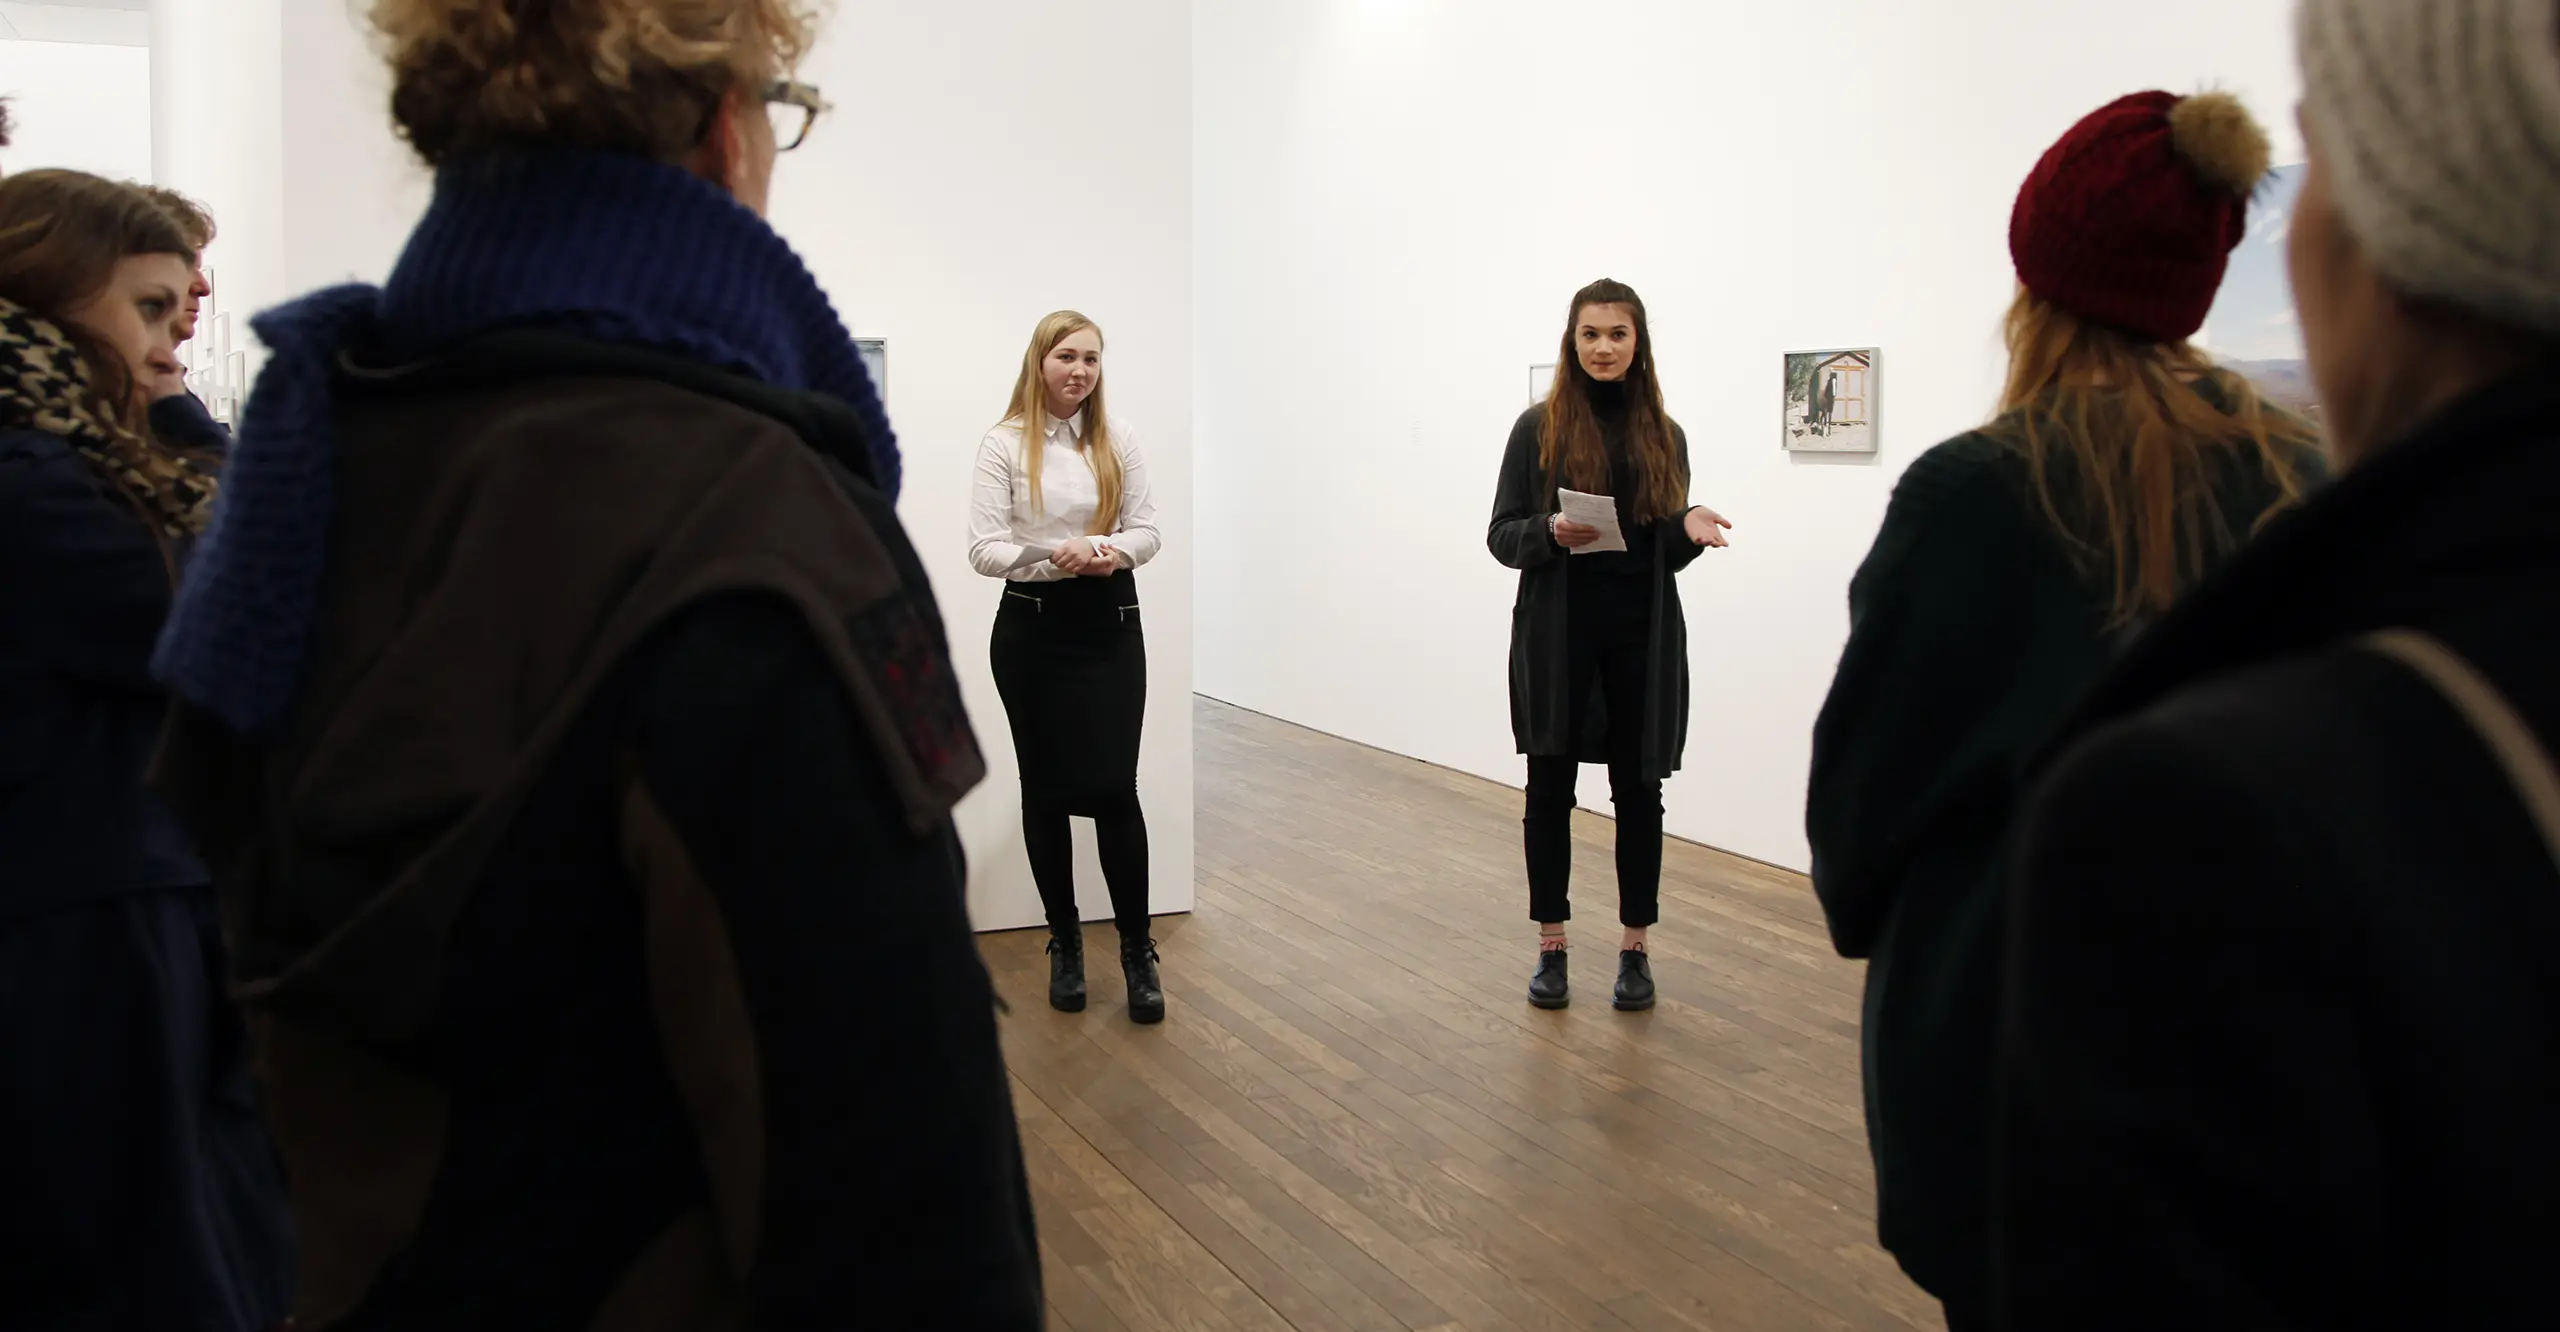 A photograph of a person in the middle of the frame pointing to a photograph on a gallery wall.